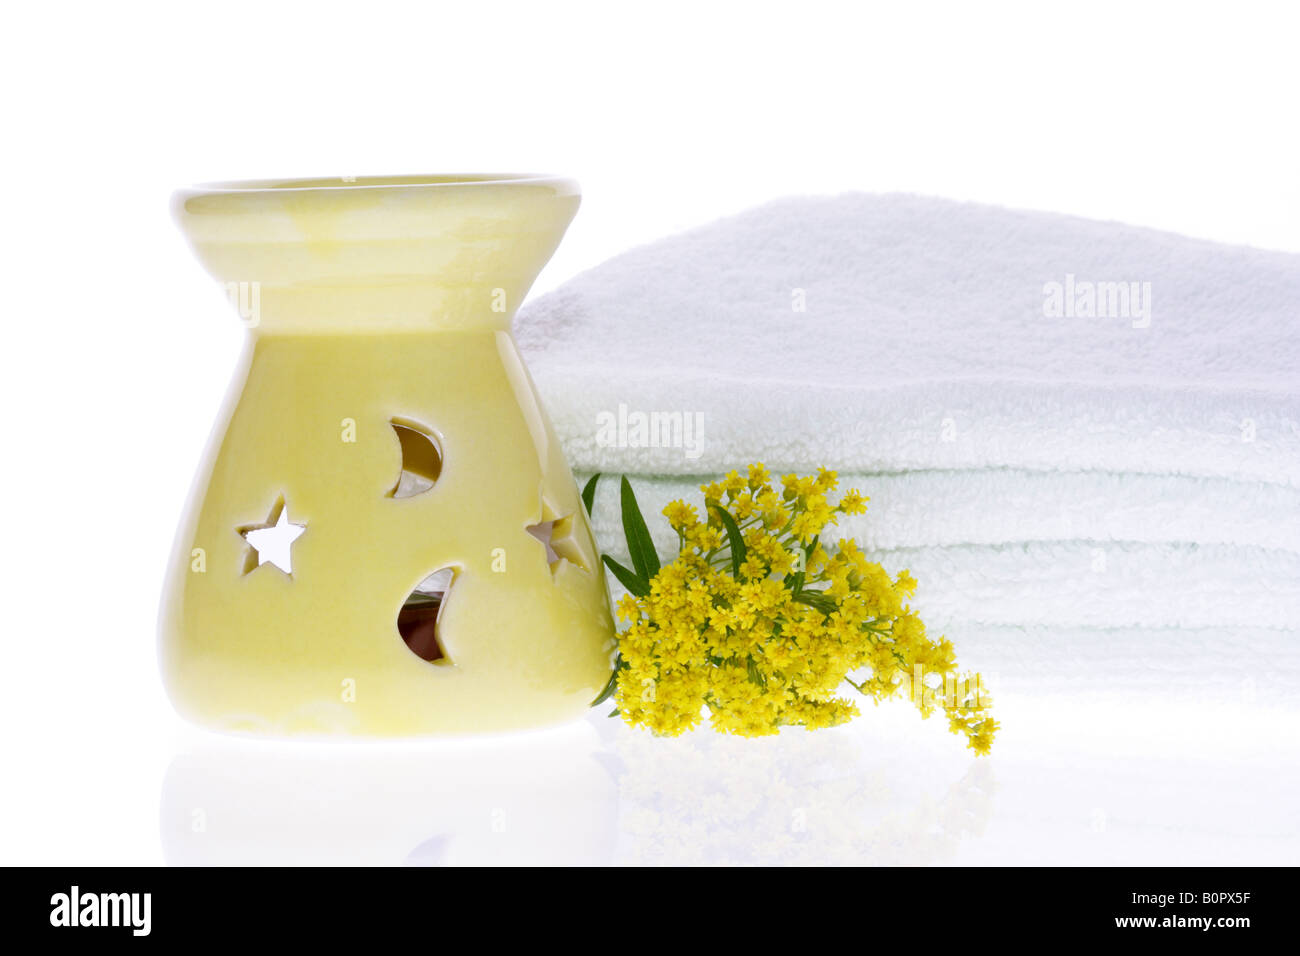 Oil Burner Yellow Flower and White Towel on White Background Stock Photo